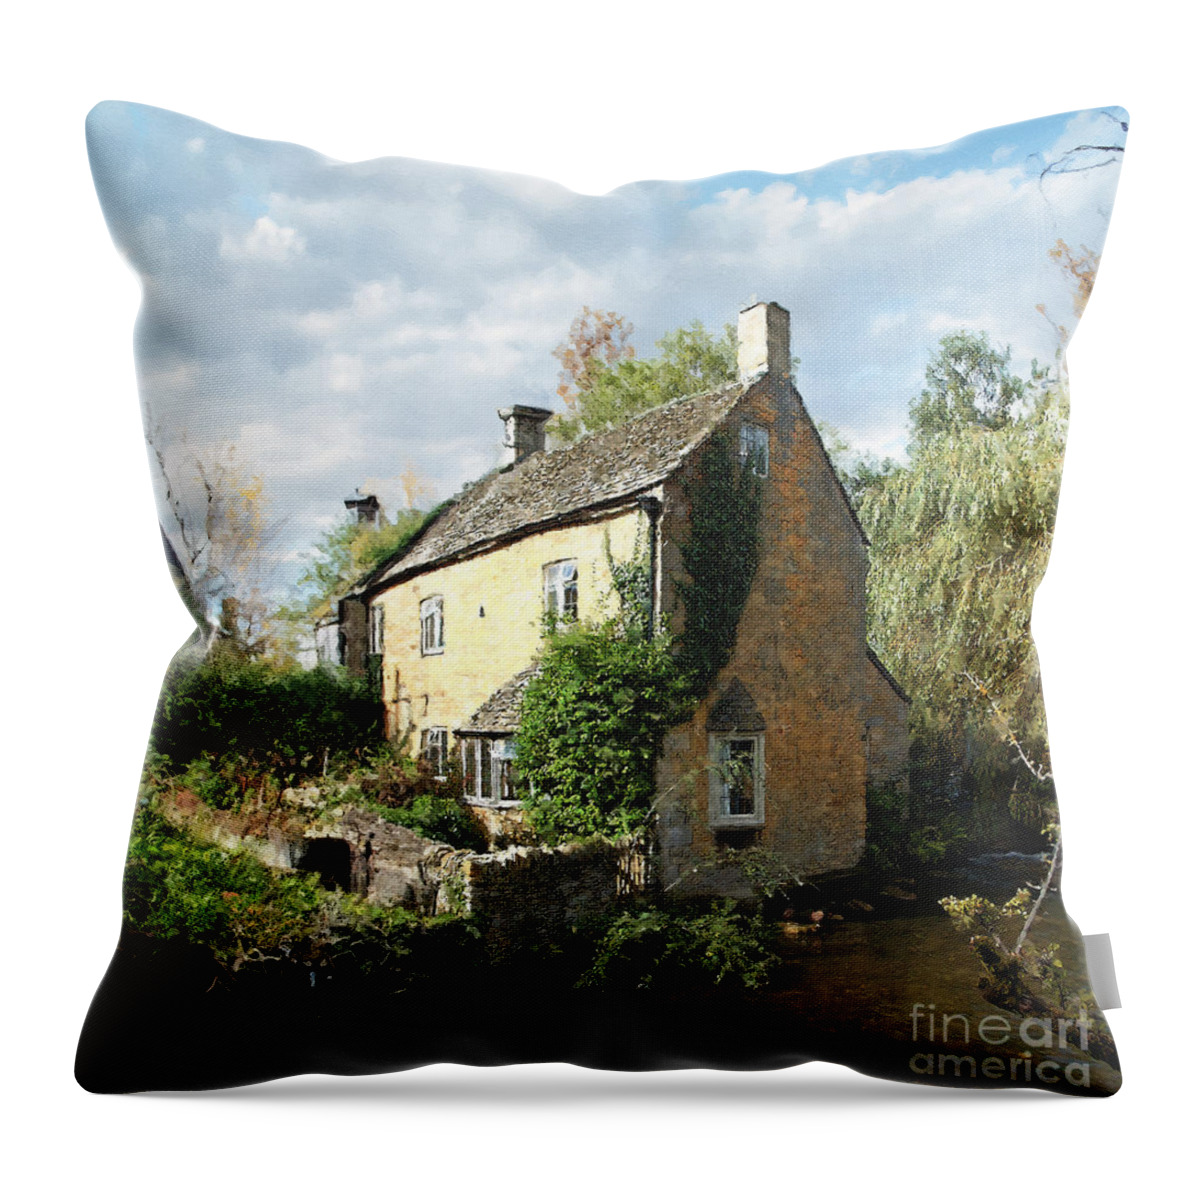 Bourton-on-the-water Throw Pillow featuring the photograph Bourton Home on the Water by Brian Watt